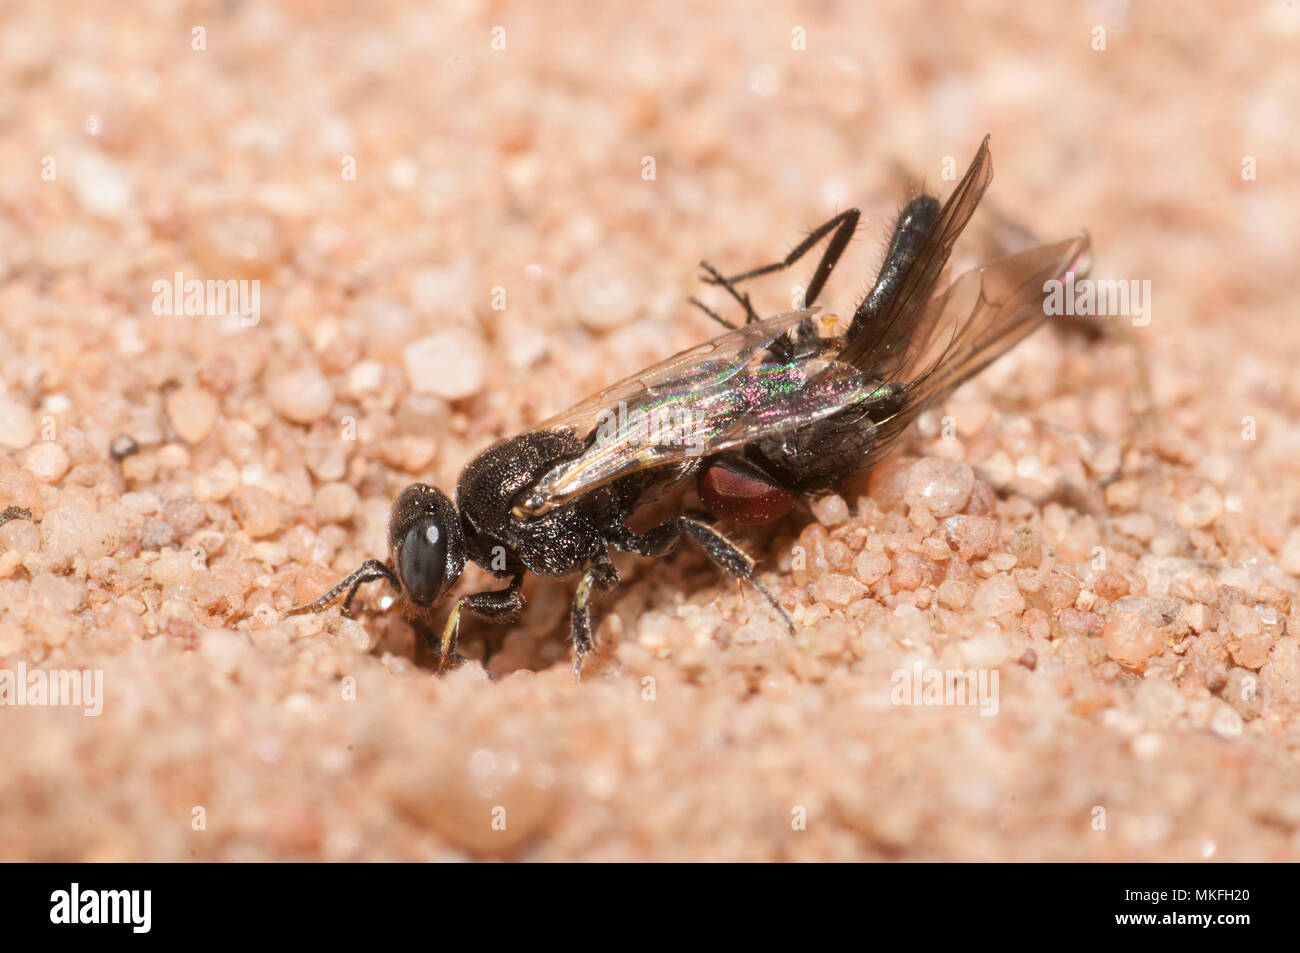 Digger wasp (Oxybelus bipunctatus) digging a gallery in the sand to deposit its prey, a fly attached to its sting, Regional Natural Park of Northern Vosges, France Stock Photo